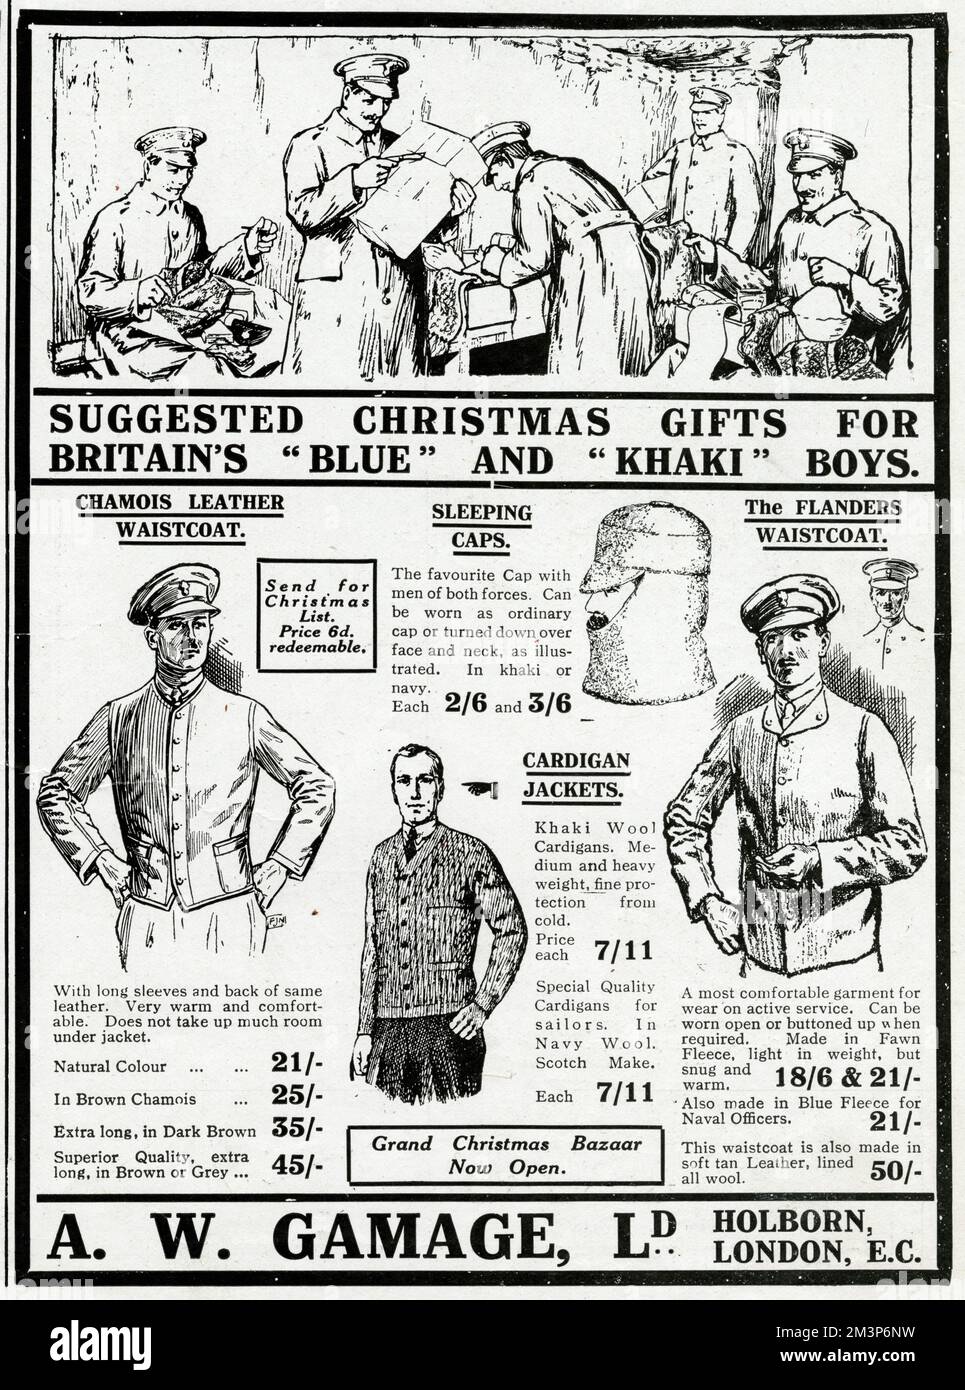 Advert for suggested Christmas gifts for Britain's 'Blue' and 'Khaki' boys.  Chamois leather waistcoat, with long sleeves, sleeping caps -favourite cap with men of both forces, can be worn as ordinary cap or turned down over face and neck,  cardigan jackets, with khaki wool medium and heavy, fine protection from cold and also the flanders waistcoat made from fawn fleece light weight and snug.  Available from A. W. Gamage of Holborn, London.   1915 Stock Photo